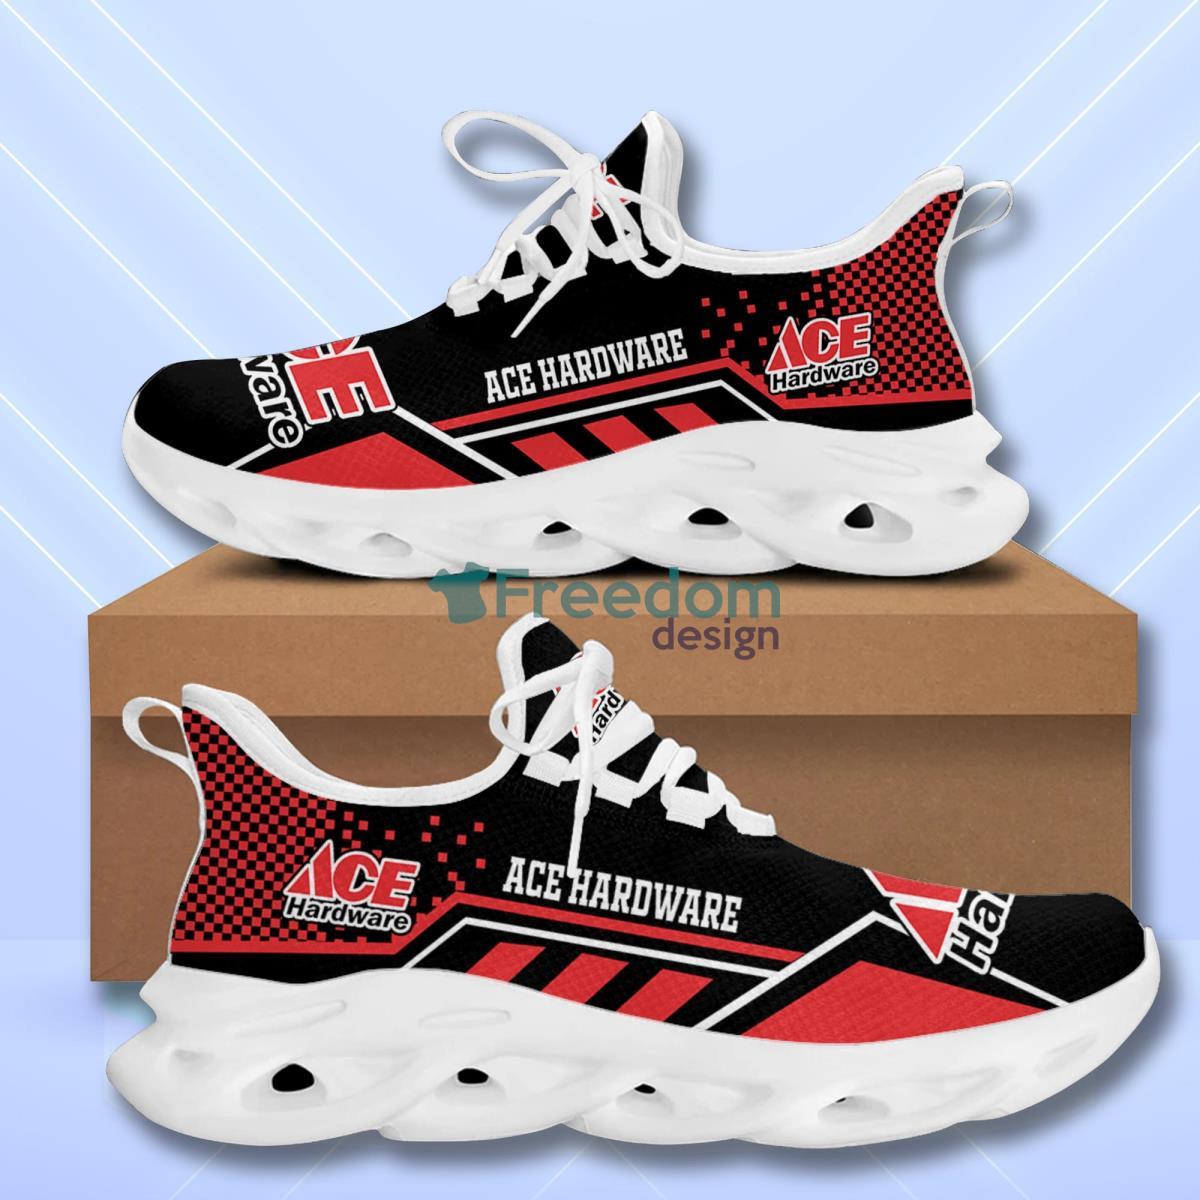 ACE Hardware Max Soul Shoes Hot Trending Impressive Gift For Men Women Product Photo 2